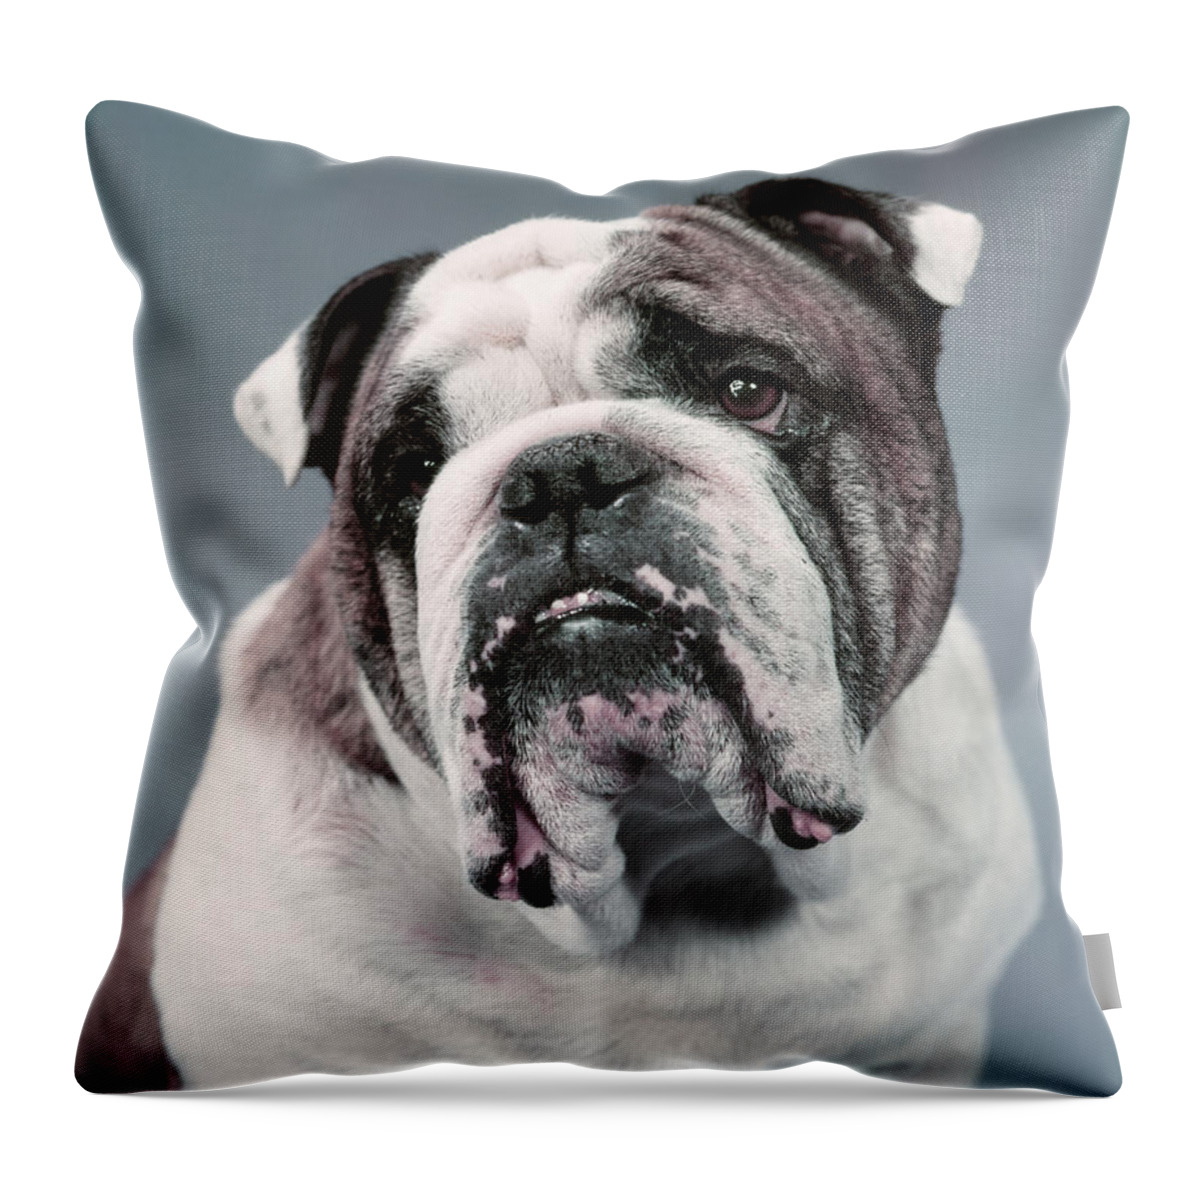 Photography Throw Pillow featuring the photograph 1960s Sad Looking Brown And White by Animal Images